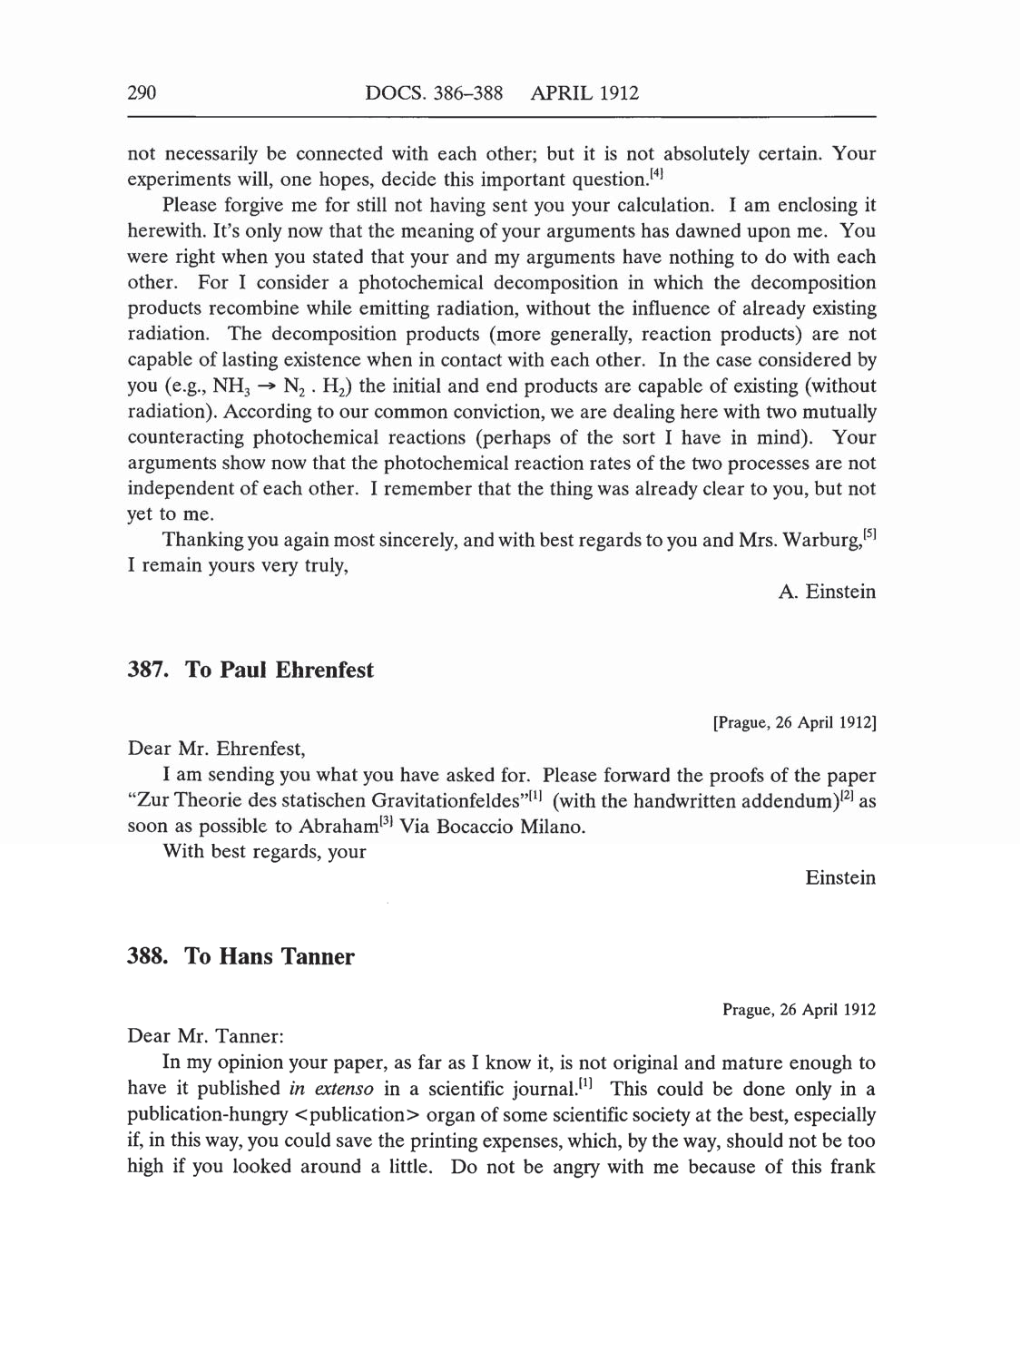 Volume 5: The Swiss Years: Correspondence, 1902-1914 (English translation supplement) page 290